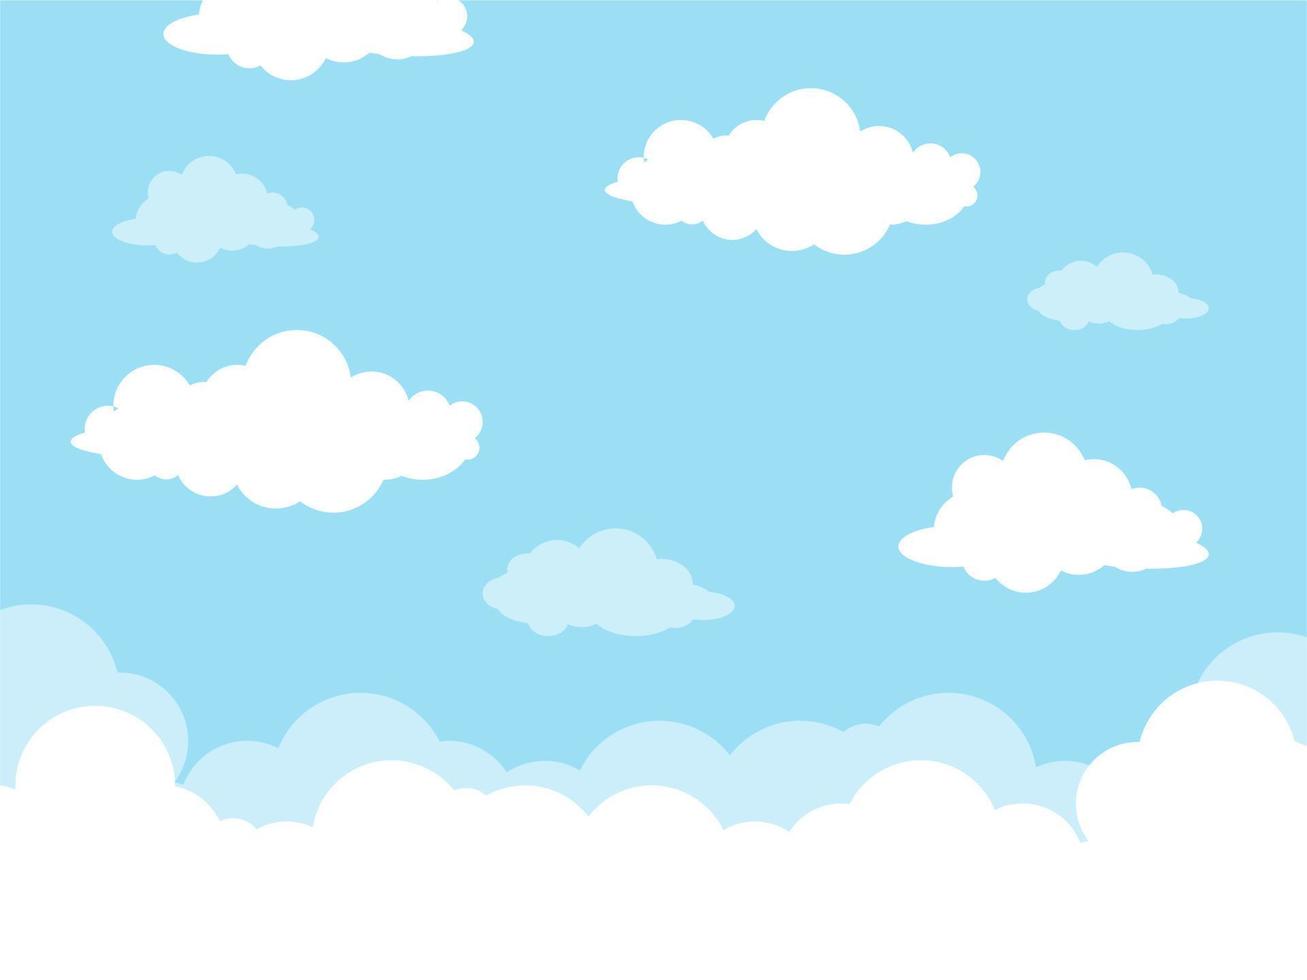 Blue sky with clouds background elegant vector